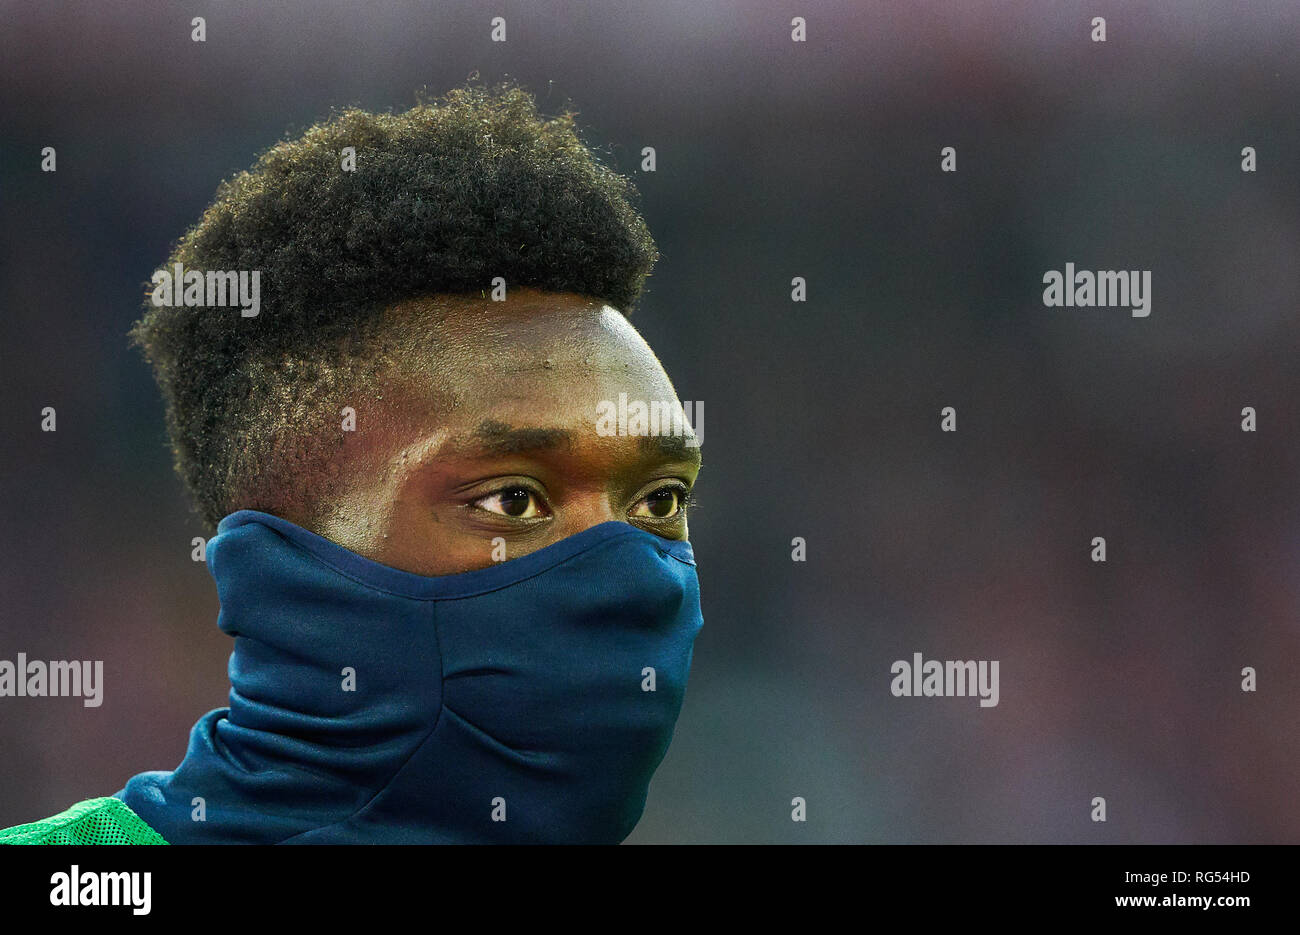 Alphonso DAVIES, FCB 19. Gymnastics, stretching, warming up, warm-up, preparation for the game,  half-size, portrait,  FC BAYERN MUNICH - VFB STUTTGART 4-1  - DFL REGULATIONS PROHIBIT ANY USE OF PHOTOGRAPHS as IMAGE SEQUENCES and/or QUASI-VIDEO -  1.German Soccer League , Munich, January 27, 2019     Stock Photo